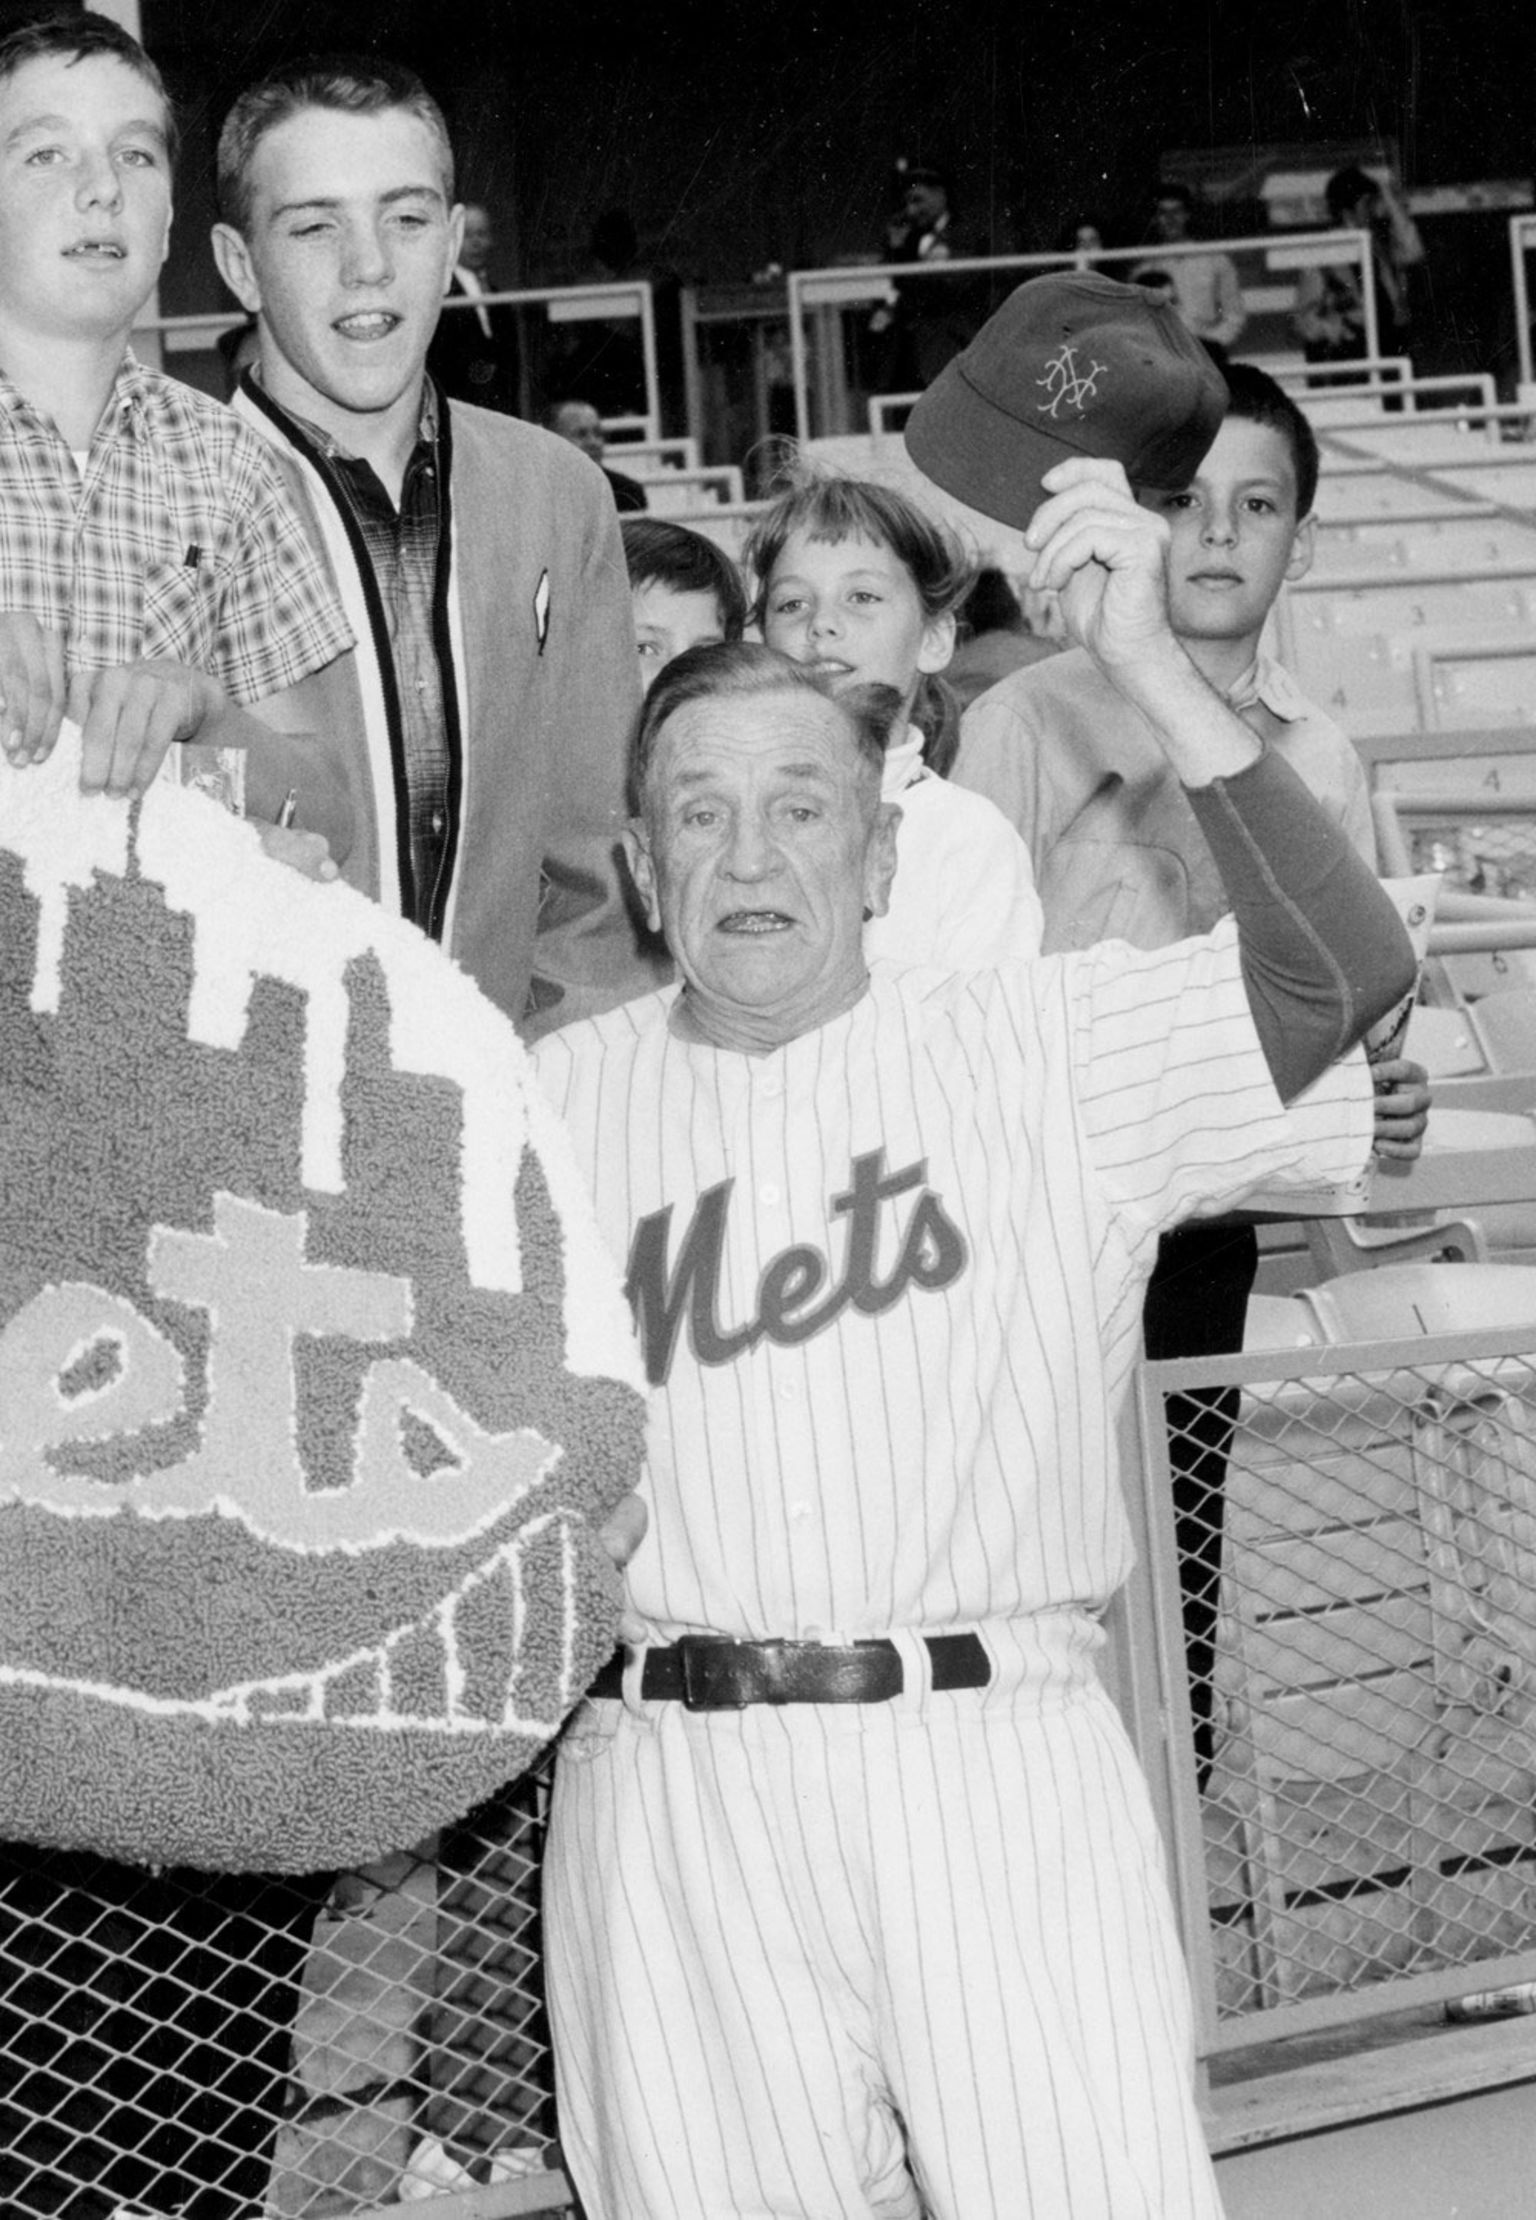 Does Mets great Jerry Koosman belong in the Hall of Fame?